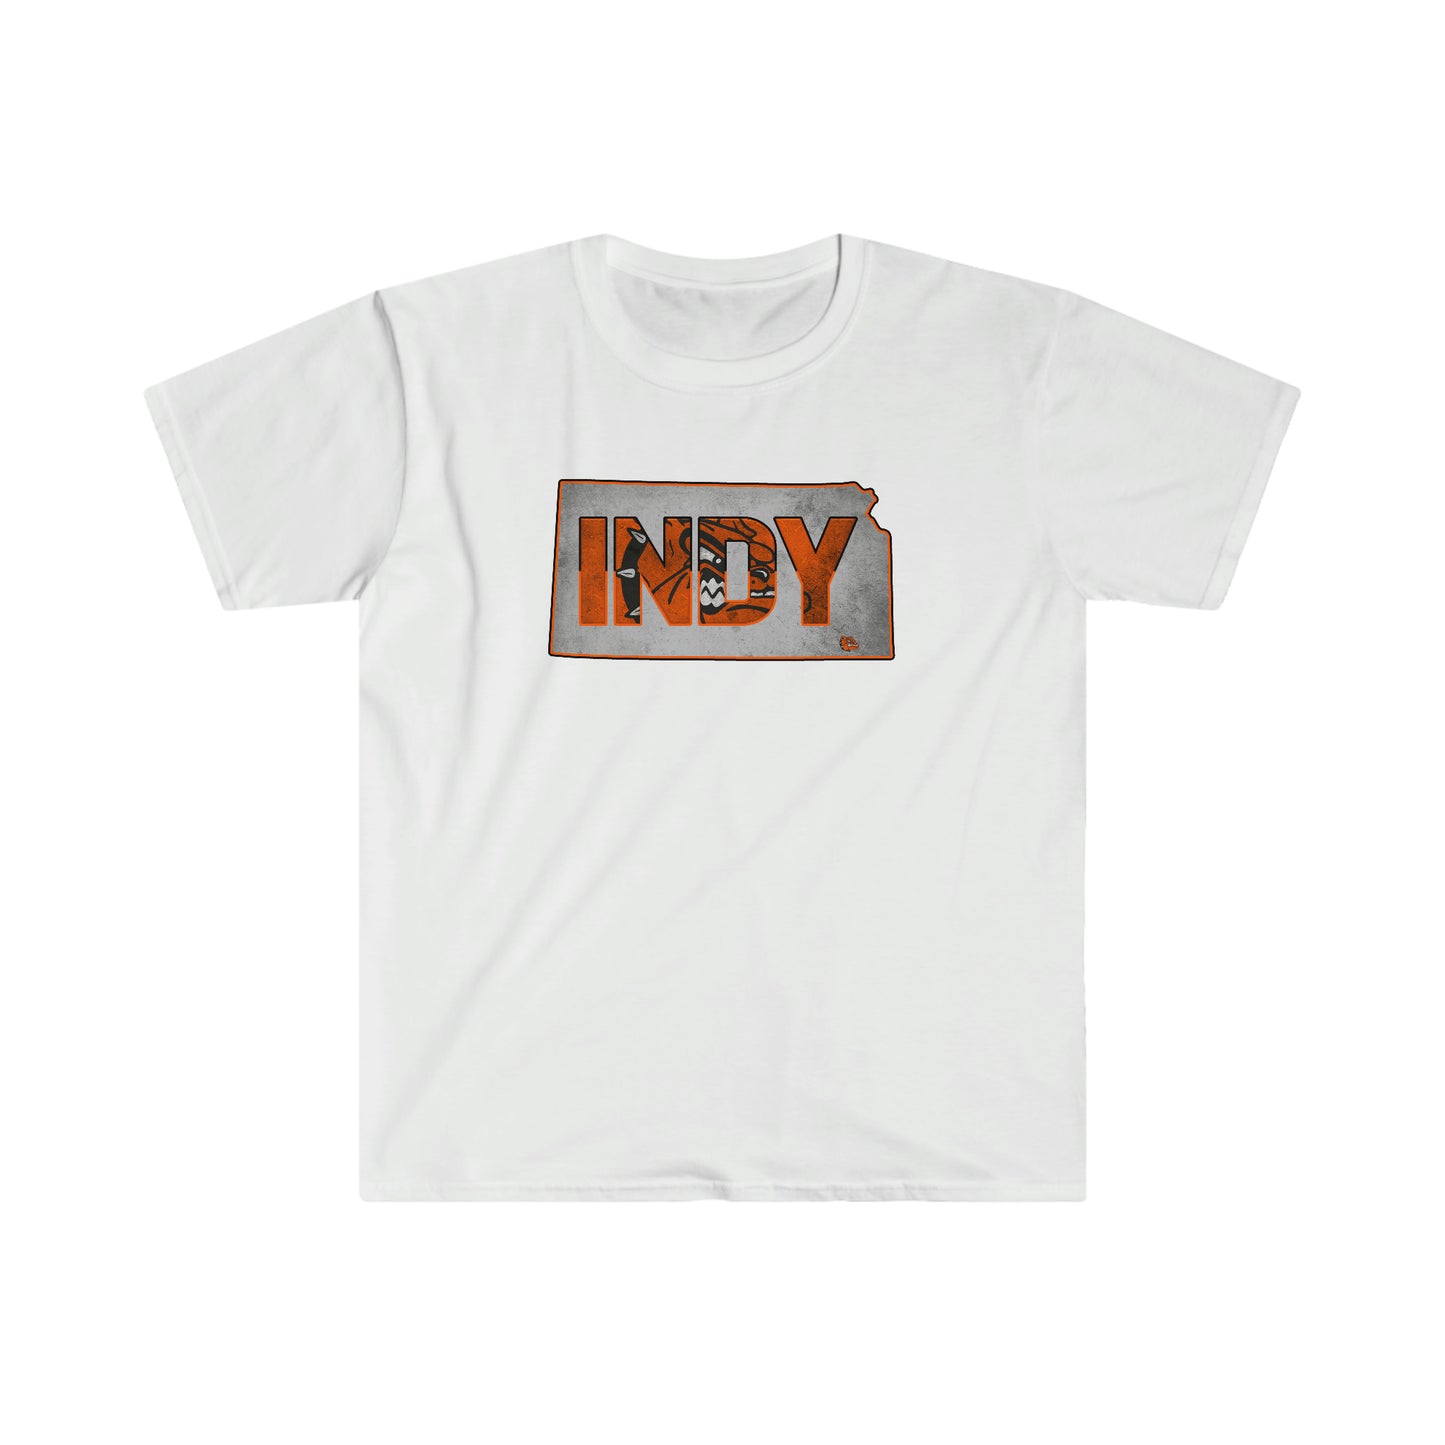 Indy KS - Softstyle T-Shirt